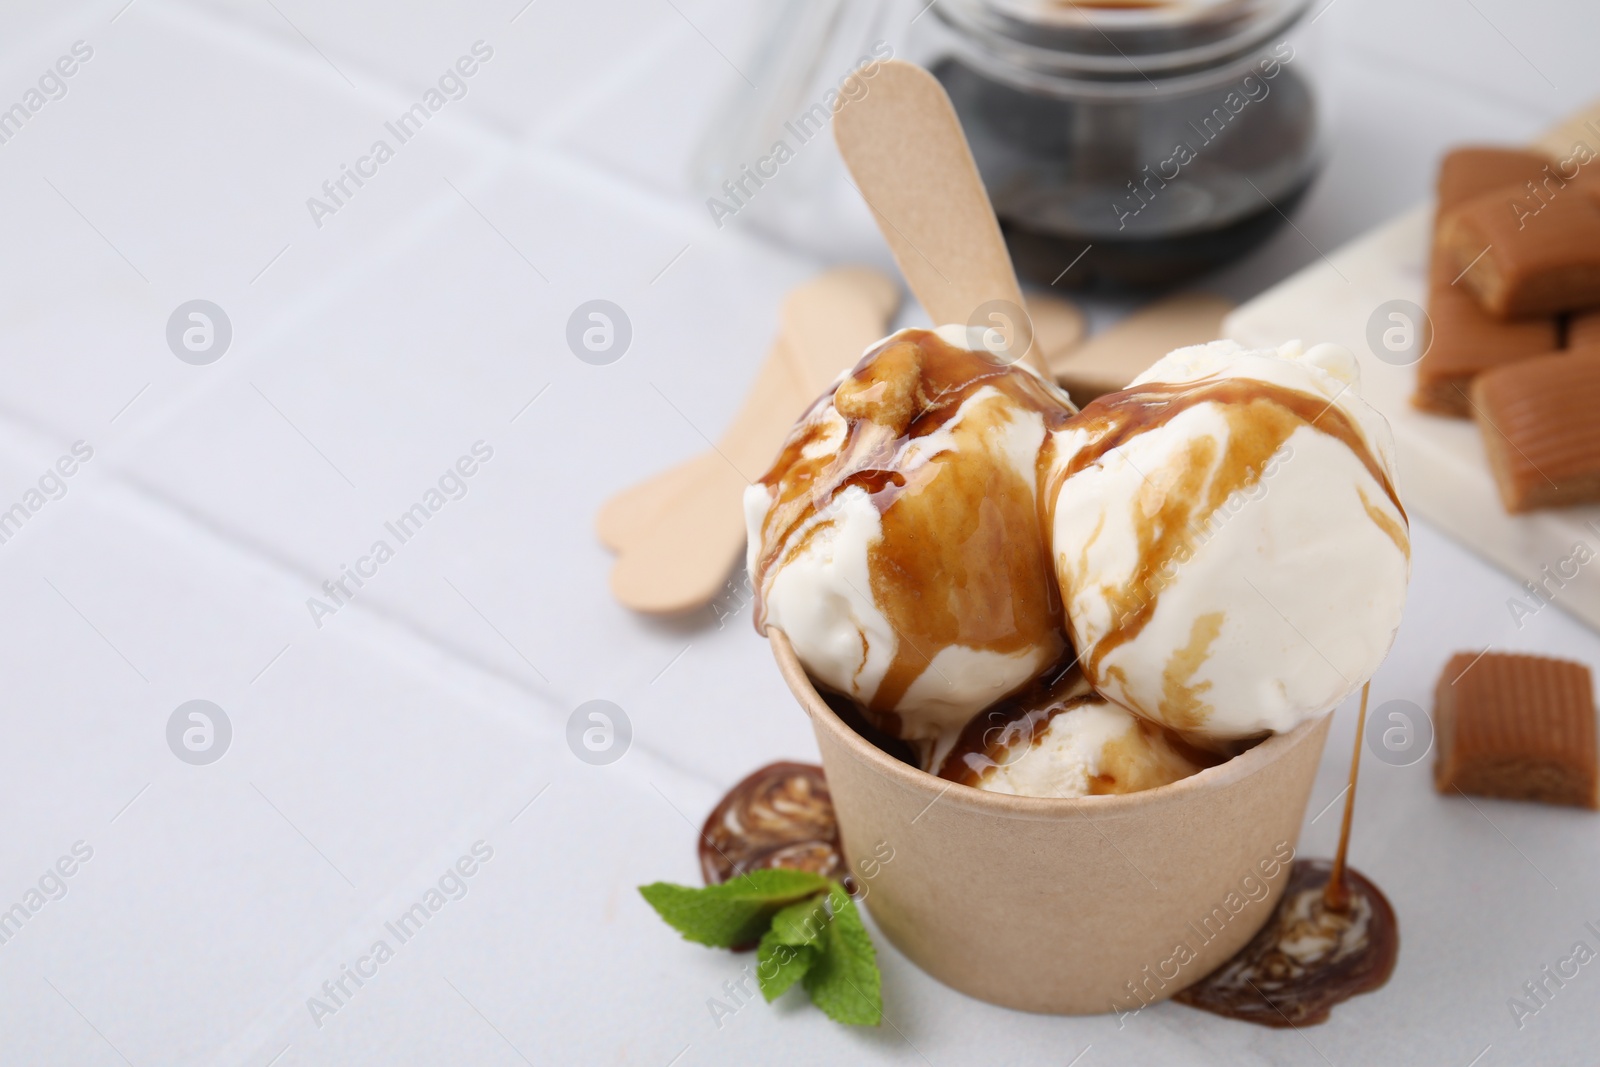 Photo of Scoops of ice cream with caramel sauce in paper cup on white tiled table, closeup. Space for text